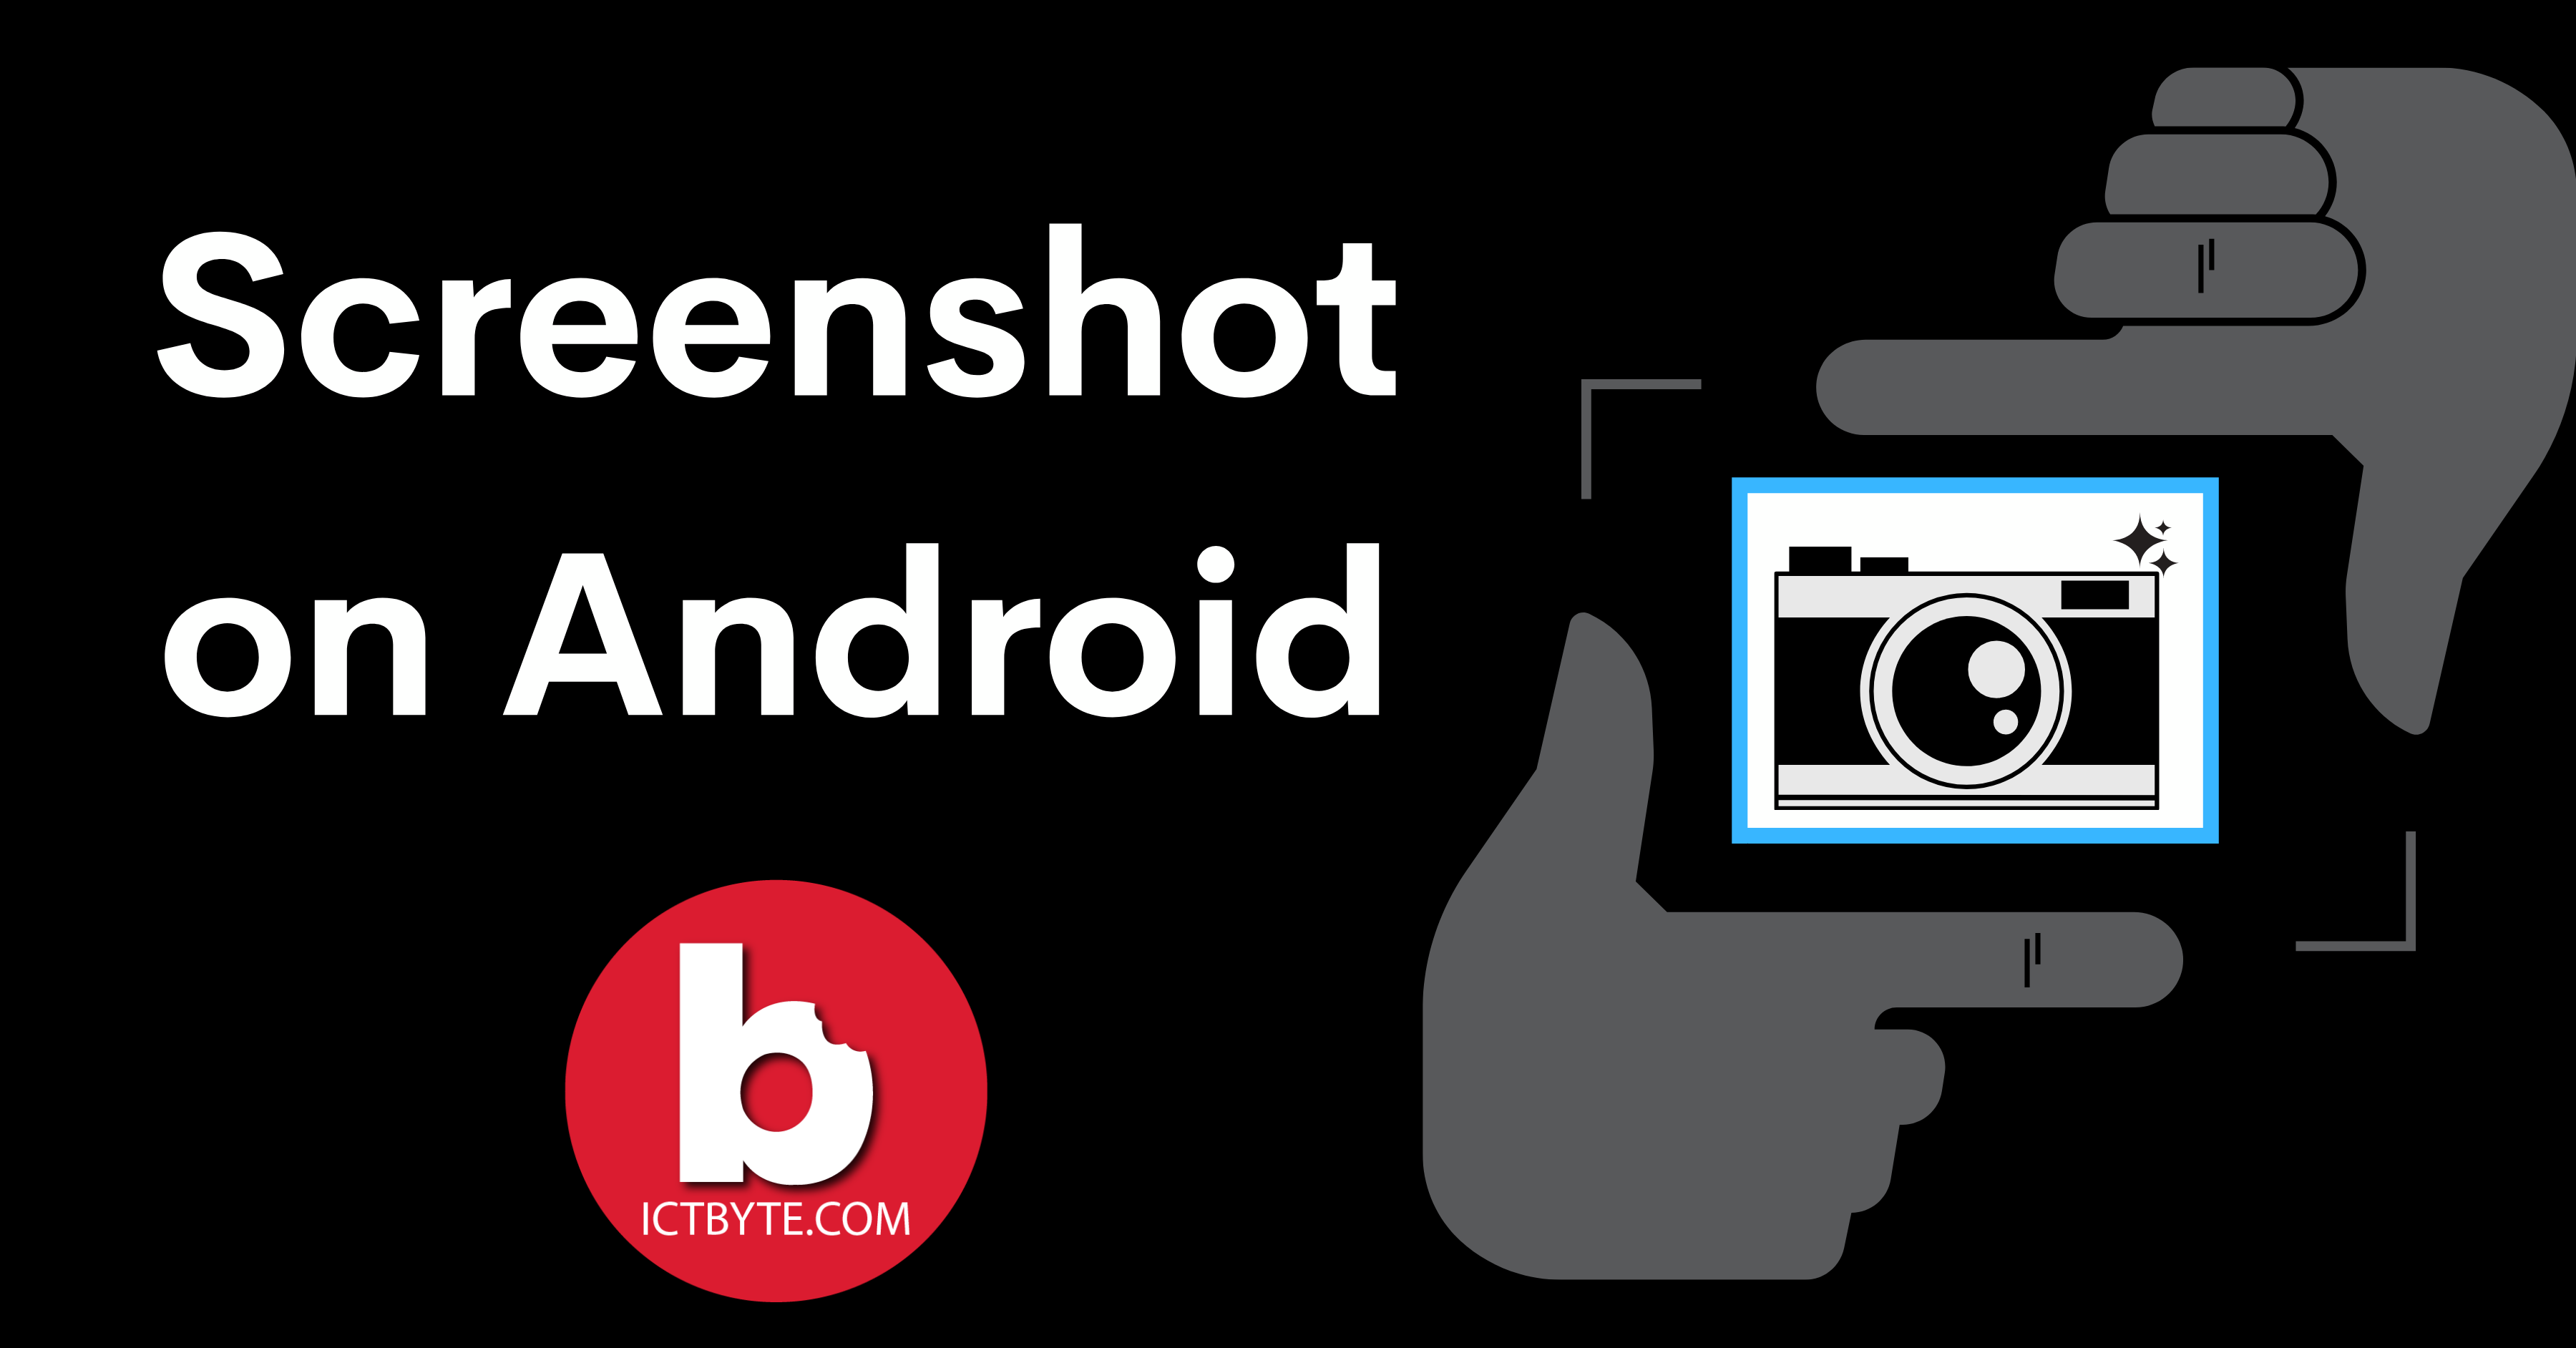 Steps to take screenshot on Android